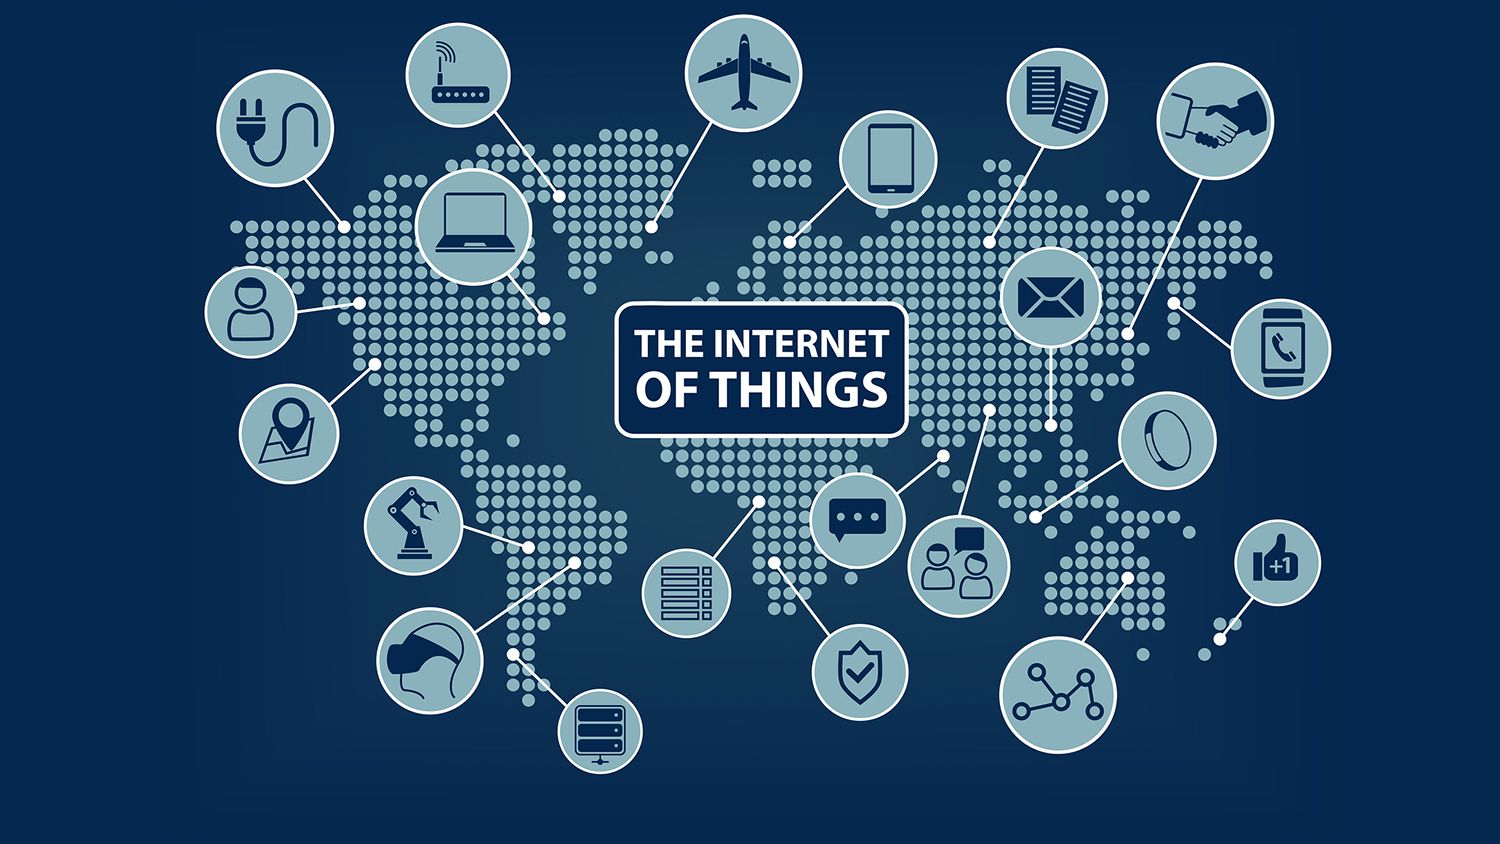 An image showing he IoT is a network of devices and applications